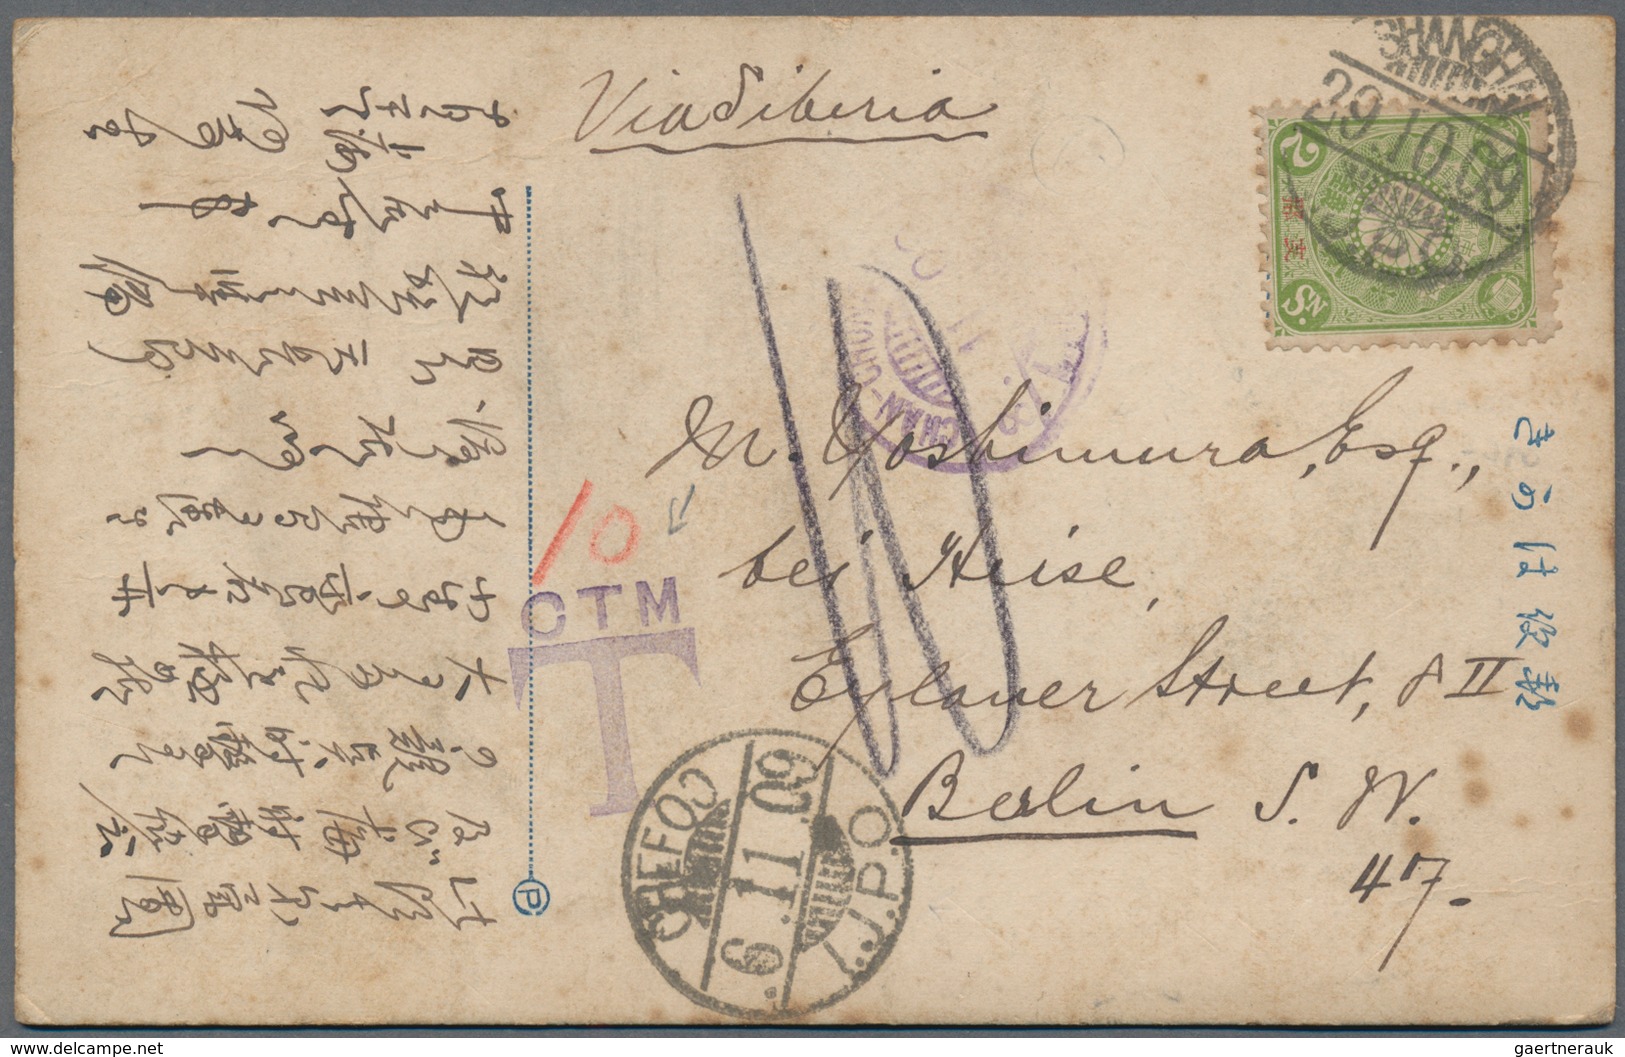 Japanische Post In China: 1900/14, Frankings On Ppc, At The 1 1/2 S. China-Japan Special Rate (3) Or - 1943-45 Shanghái & Nankín